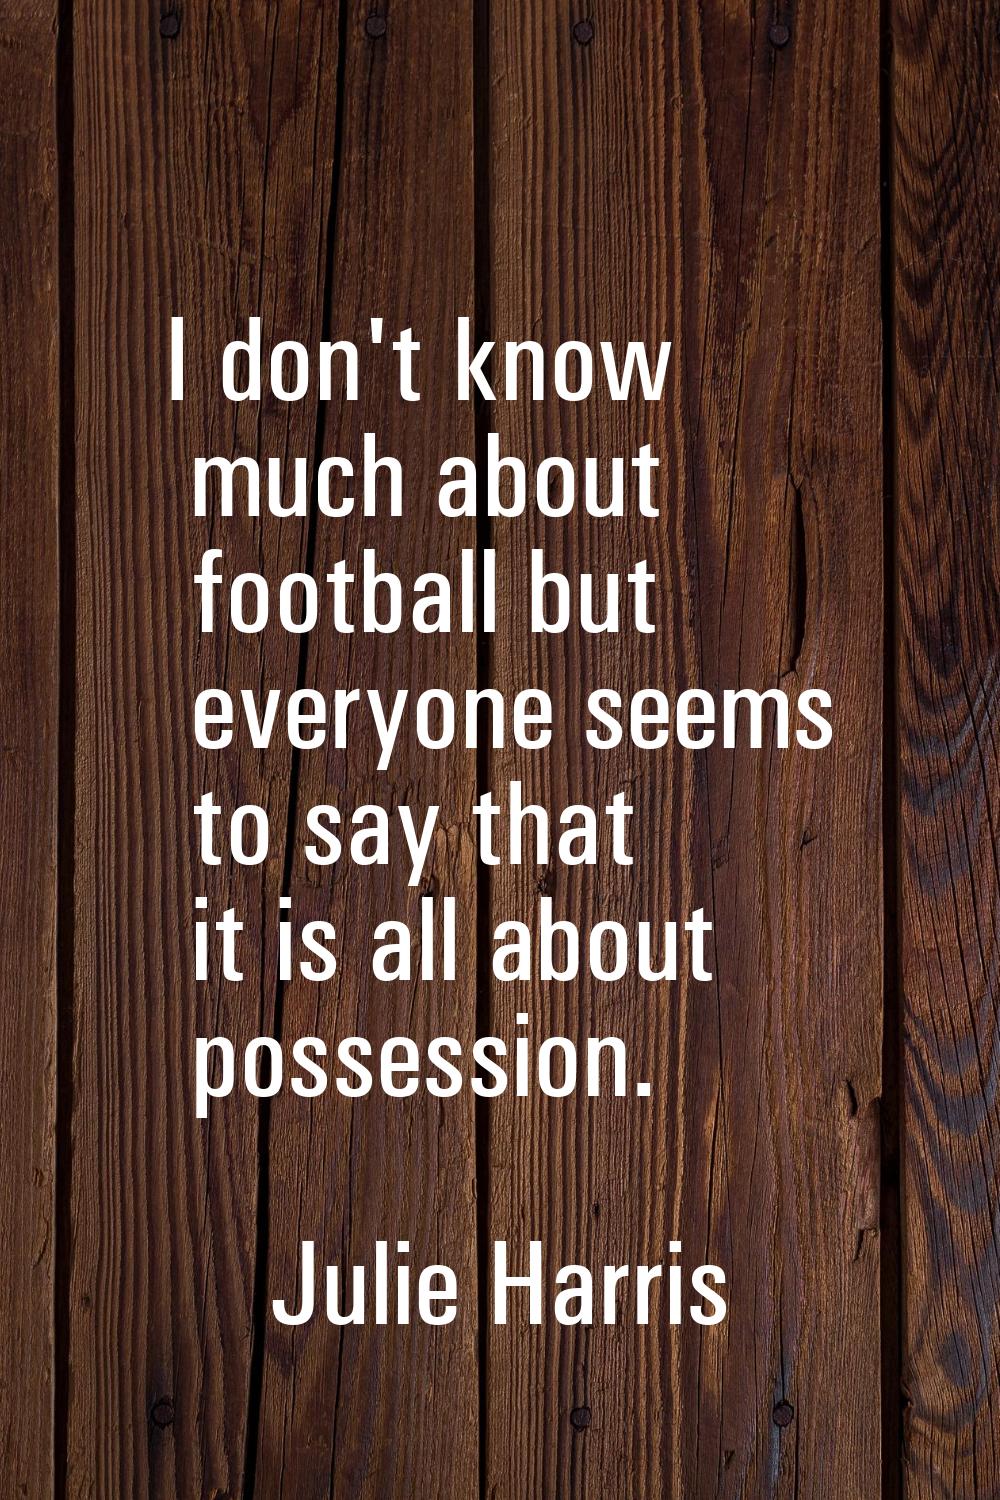 I don't know much about football but everyone seems to say that it is all about possession.